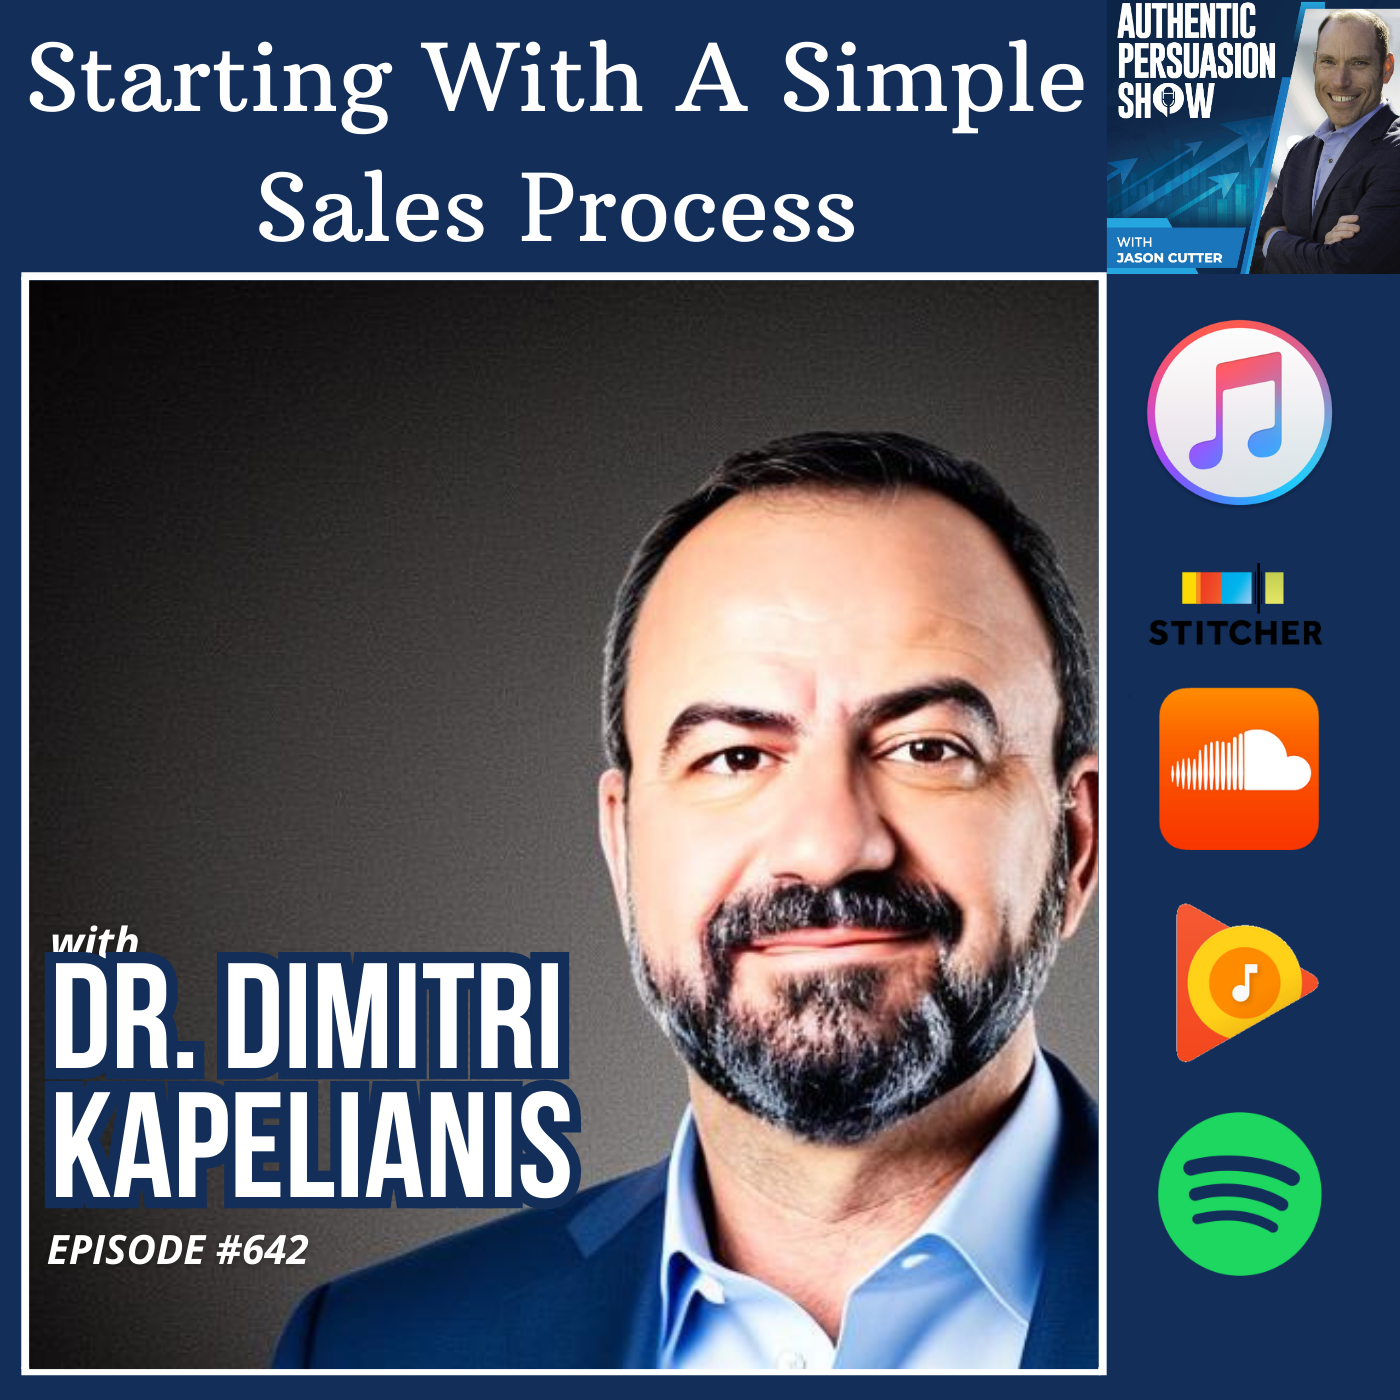 [642] Starting With A Simple Sales Process, with Dr. Dimitri Kapelianis from University of New Mexico